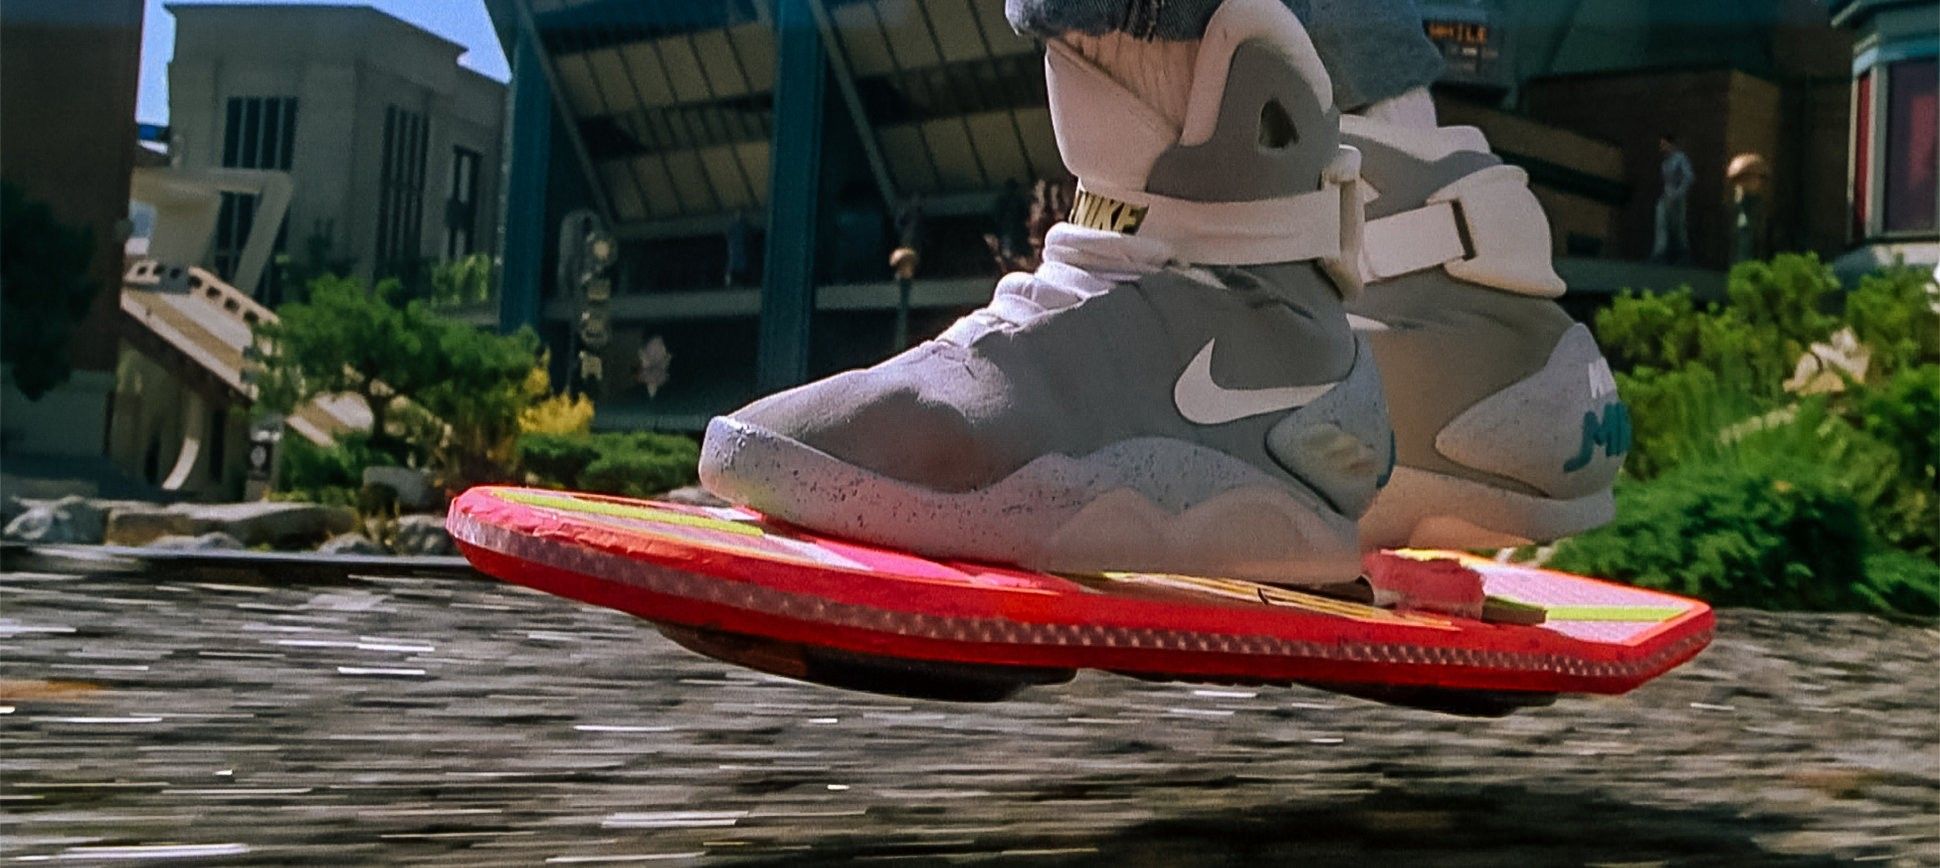 Back to the Future Hoverboard Tutorial